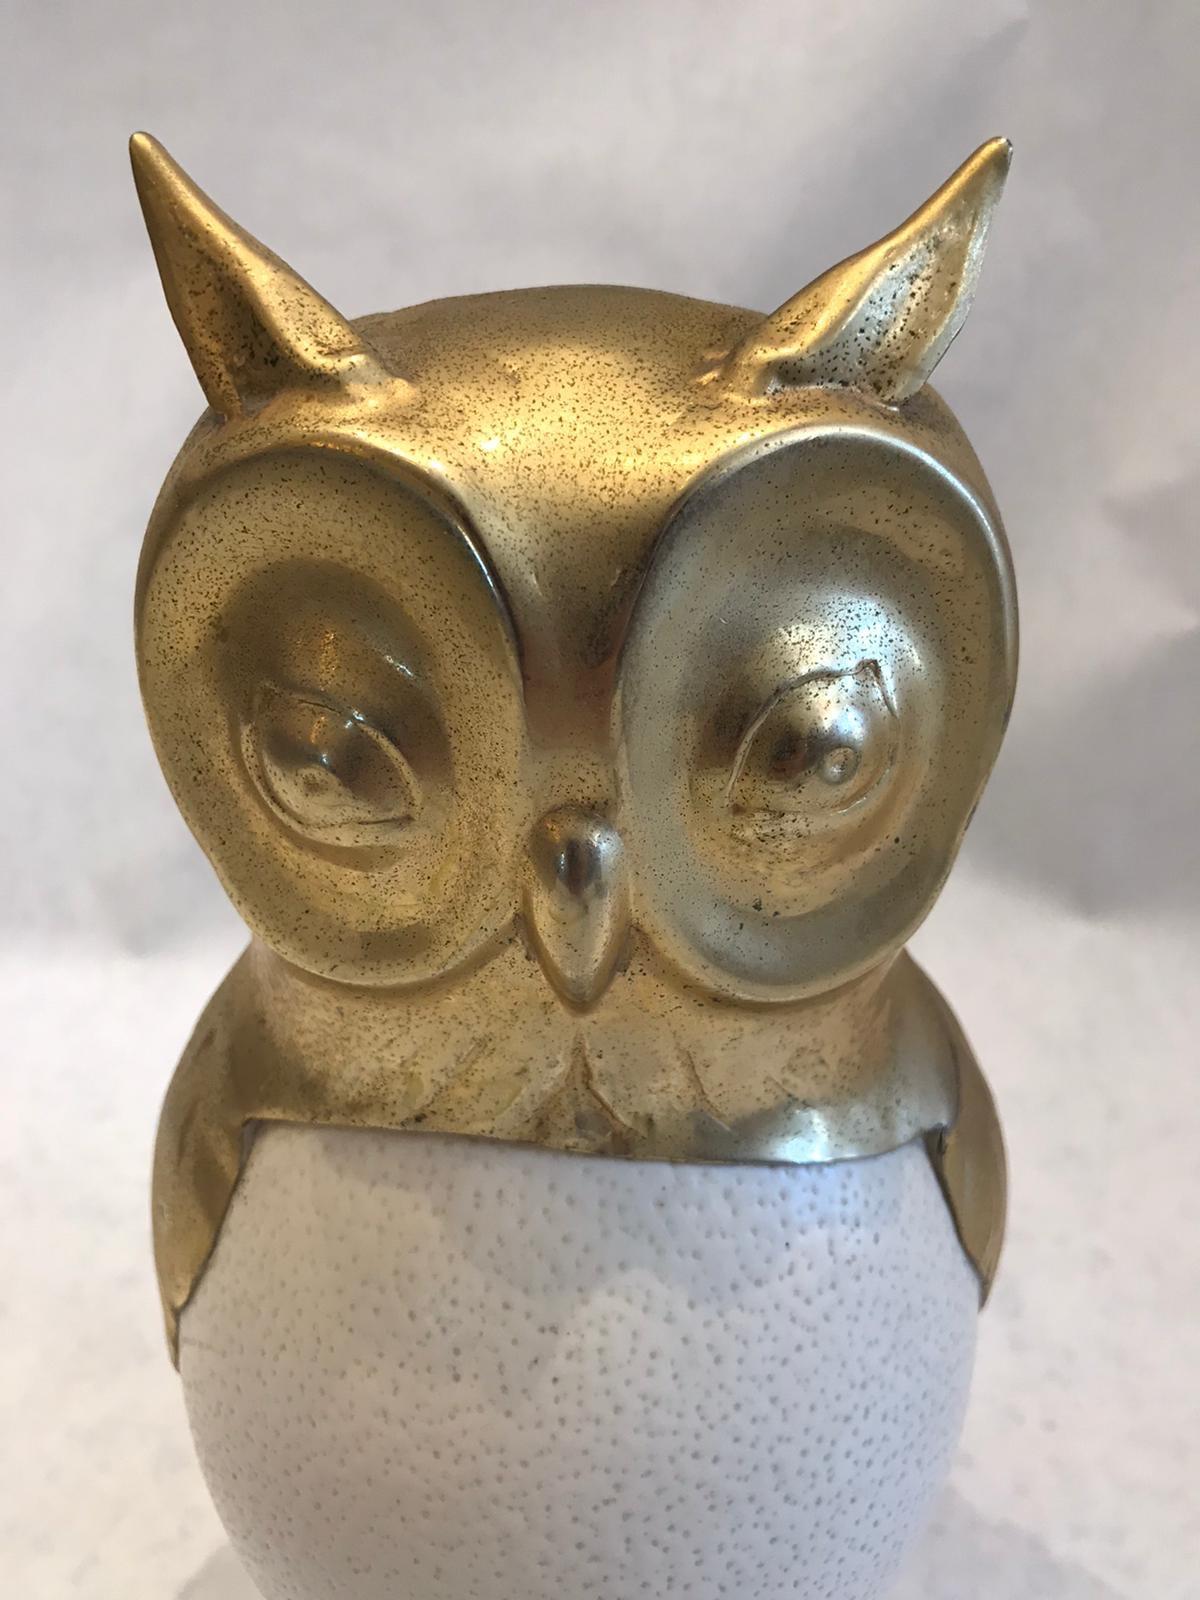 Darling as can be, this whimsical vintage owl sculpture made from gilded metal and a real ostrich egg. Not signed but possibly by Anthony Redmile. It is of very high quality in detail, craftsmanship and proportion.